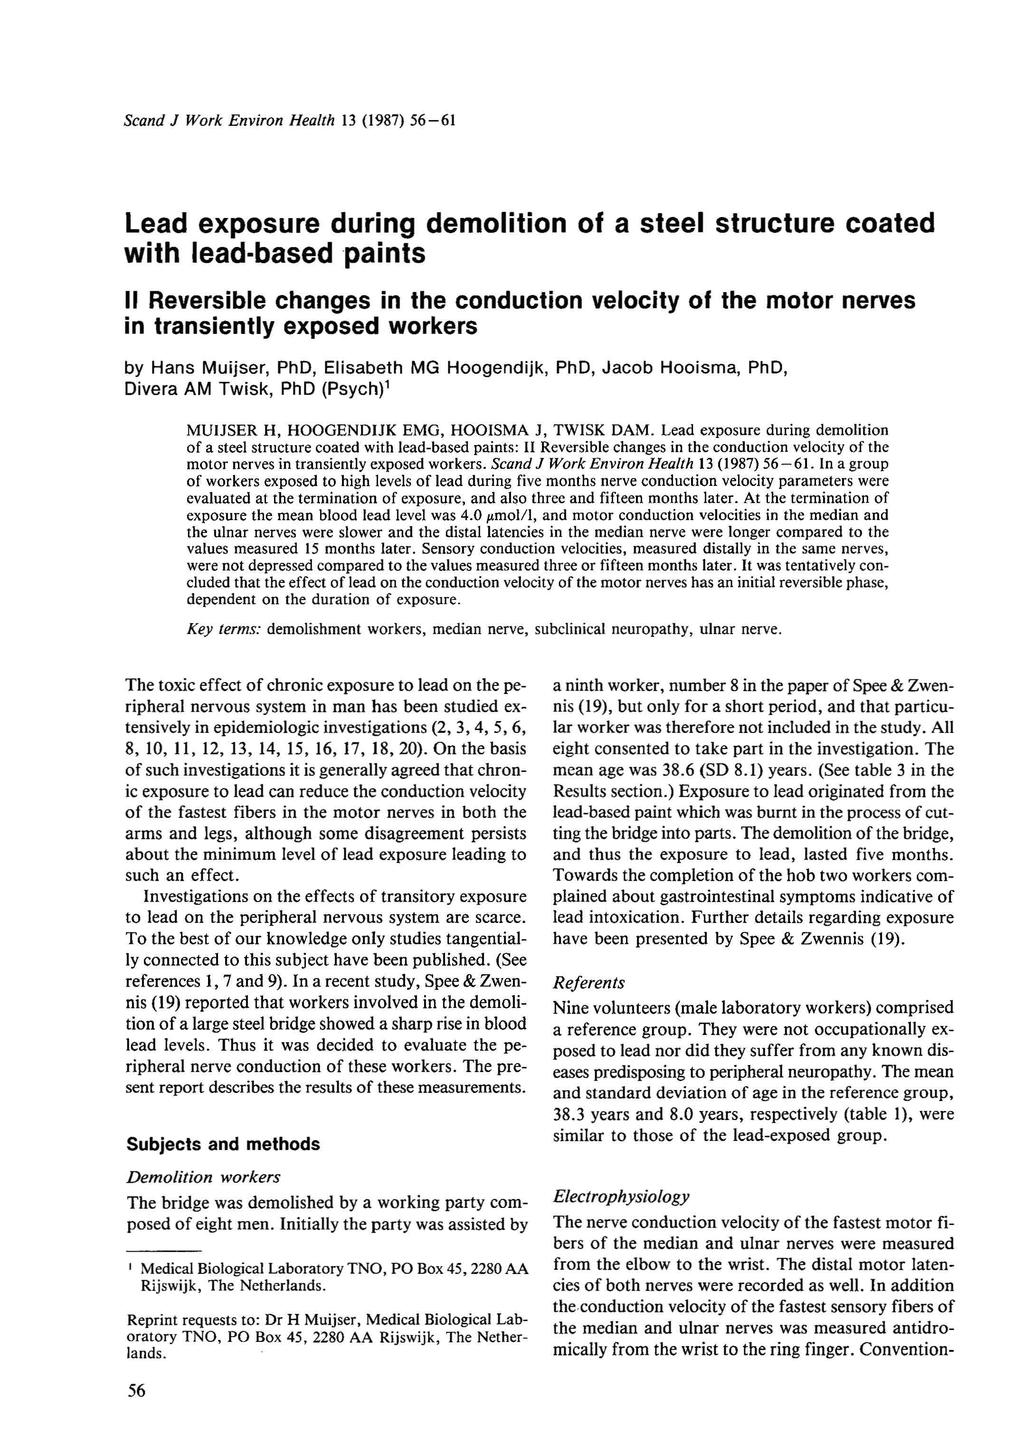 Scand J Work Environ Health 13 (1987) 56-61 Lead exposure during demolition of a steel structure coated with lead-based paints II Reversible changes in the conduction velocity of the motor nerves in